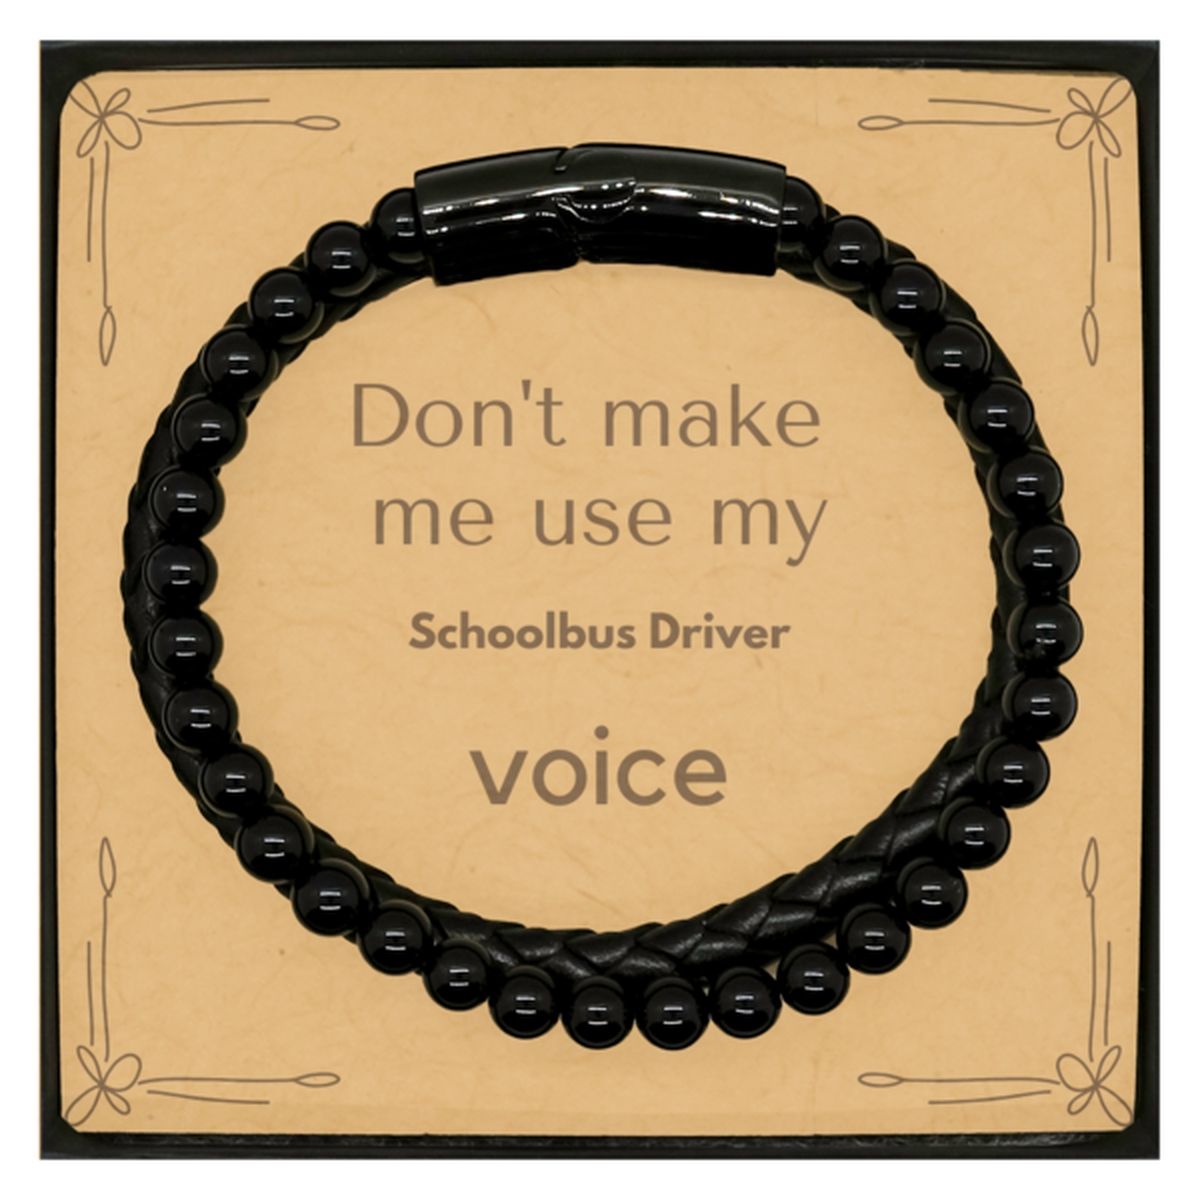 Don't make me use my Schoolbus Driver voice, Sarcasm Schoolbus Driver Card Gifts, Christmas Schoolbus Driver Stone Leather Bracelets Birthday Unique Gifts For Schoolbus Driver Coworkers, Men, Women, Colleague, Friends